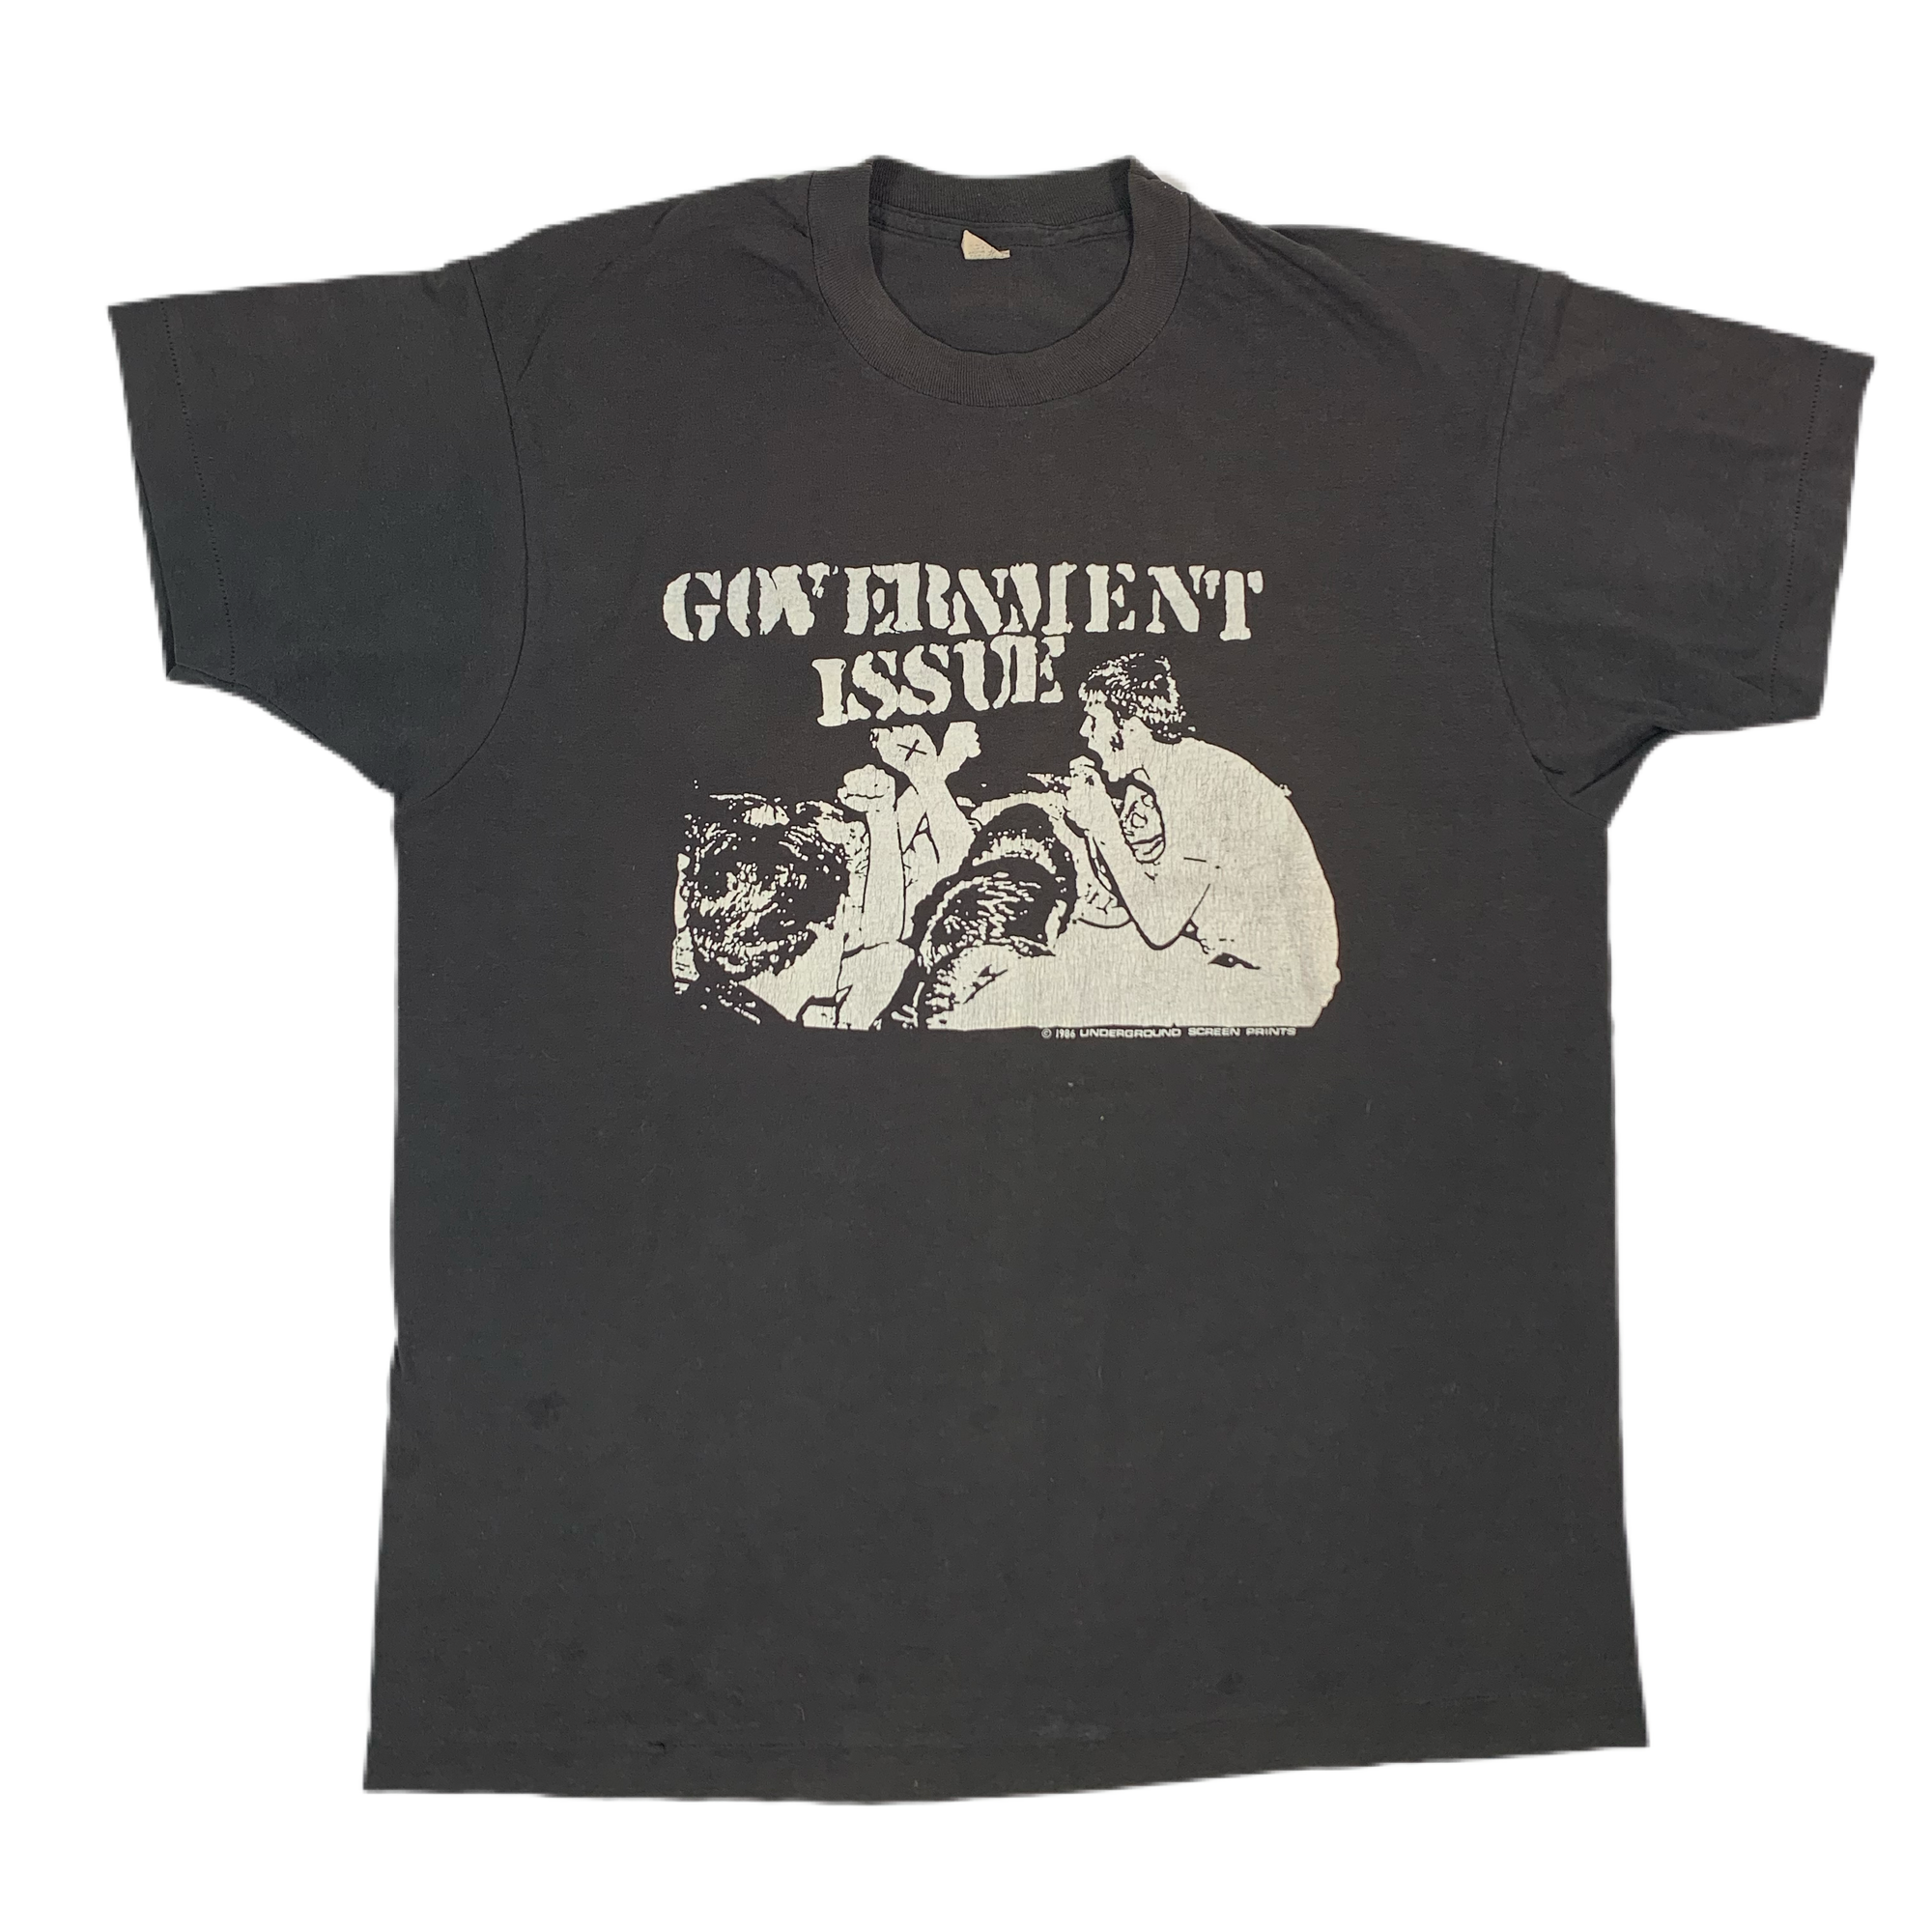 Vintage Government Issue “Underground Screen Prints” T-Shirt - jointcustodydc